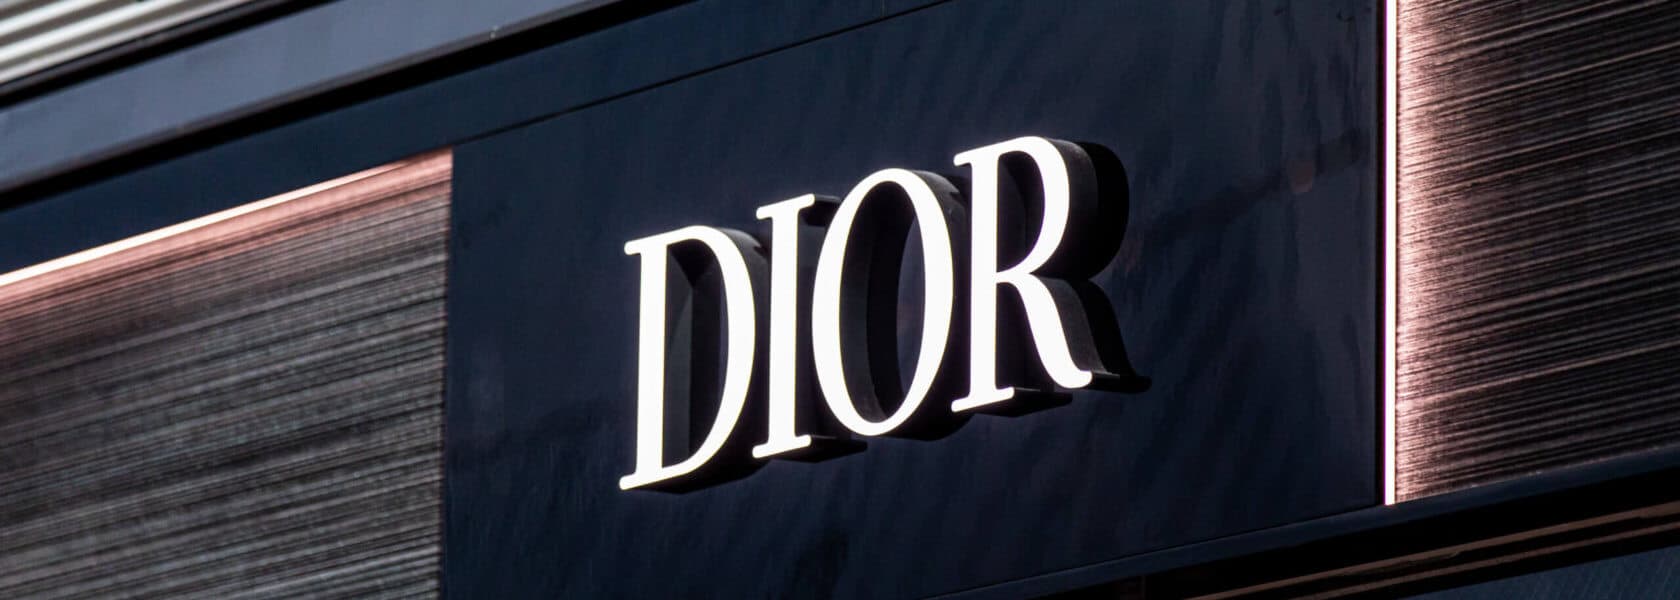 UNESCO And Dior Launch Leadership Programme